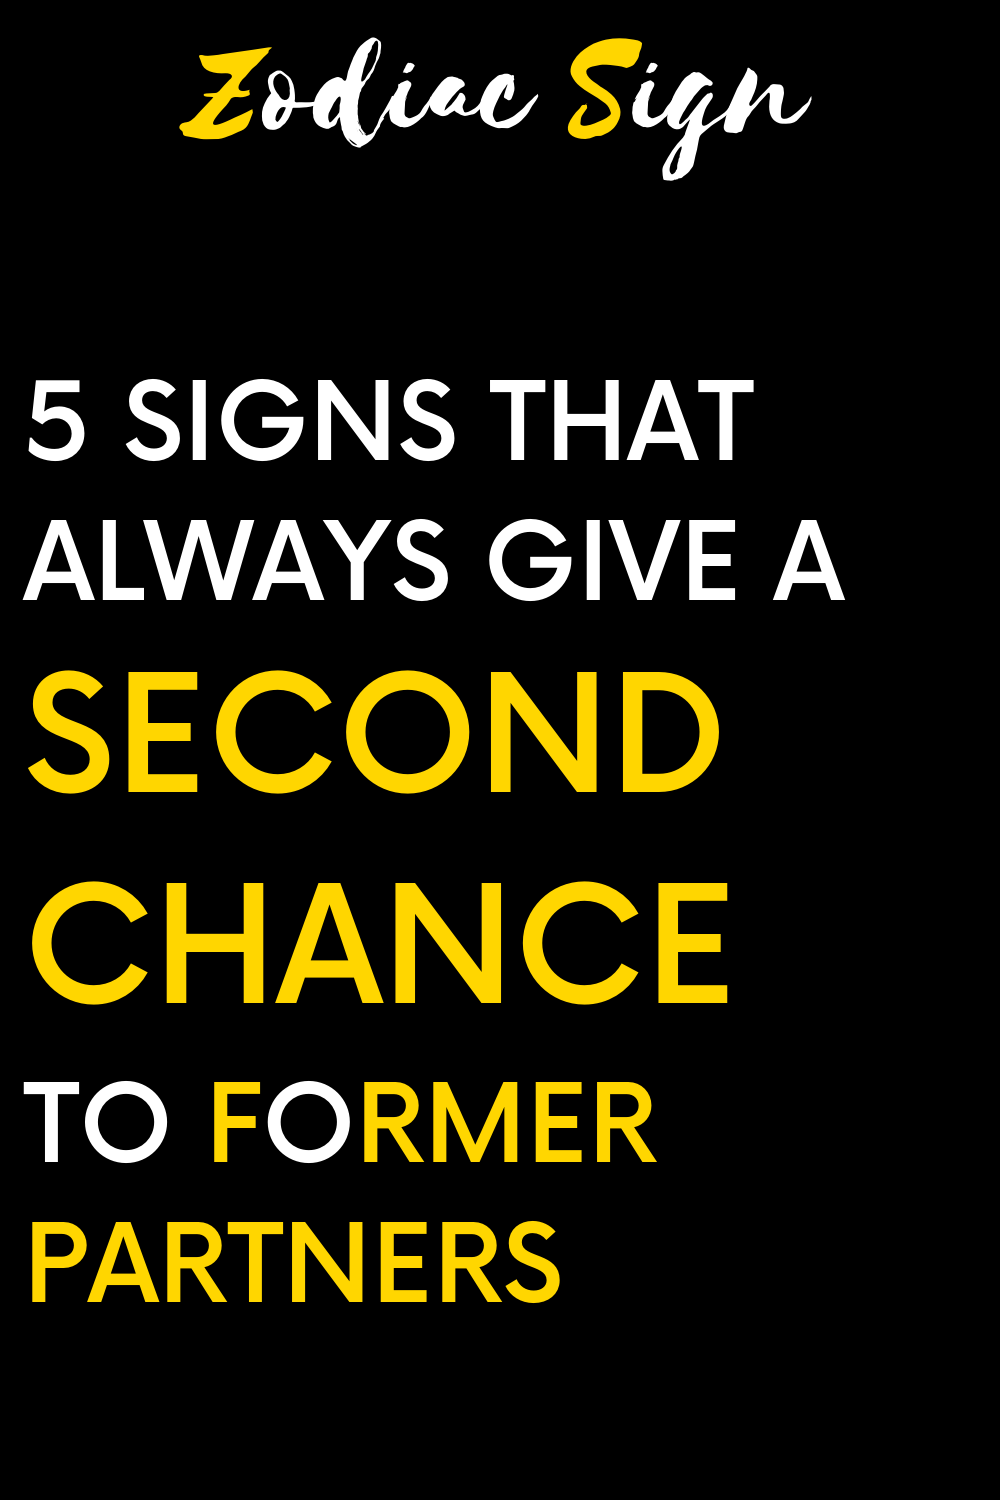 5 signs that always give a second chance to former partners